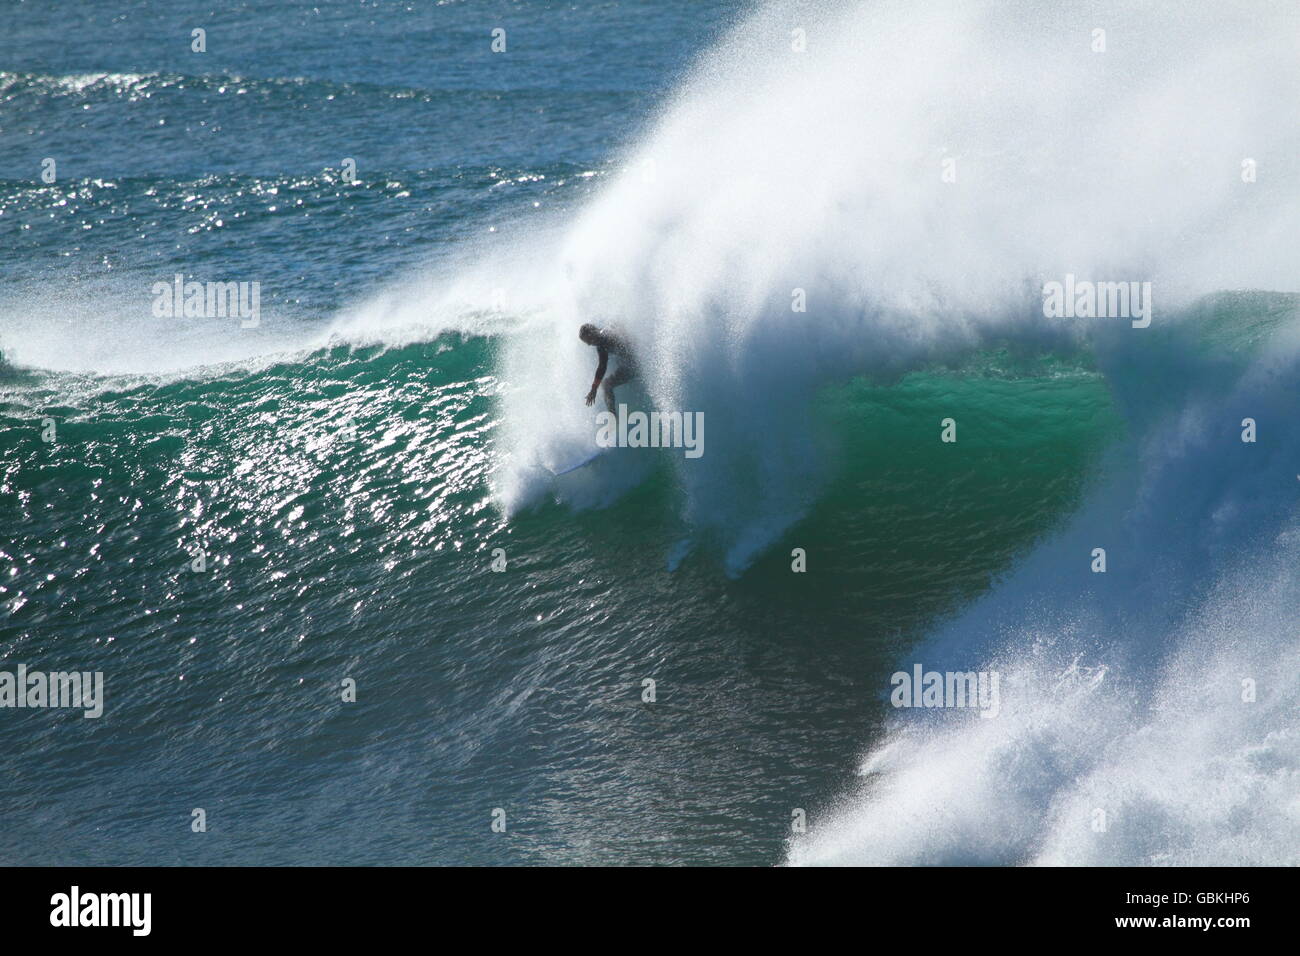 A lone male surfer drops in on a large wave during big surf at Sandon Point, Bulli, NSW, Australia. Stock Photo